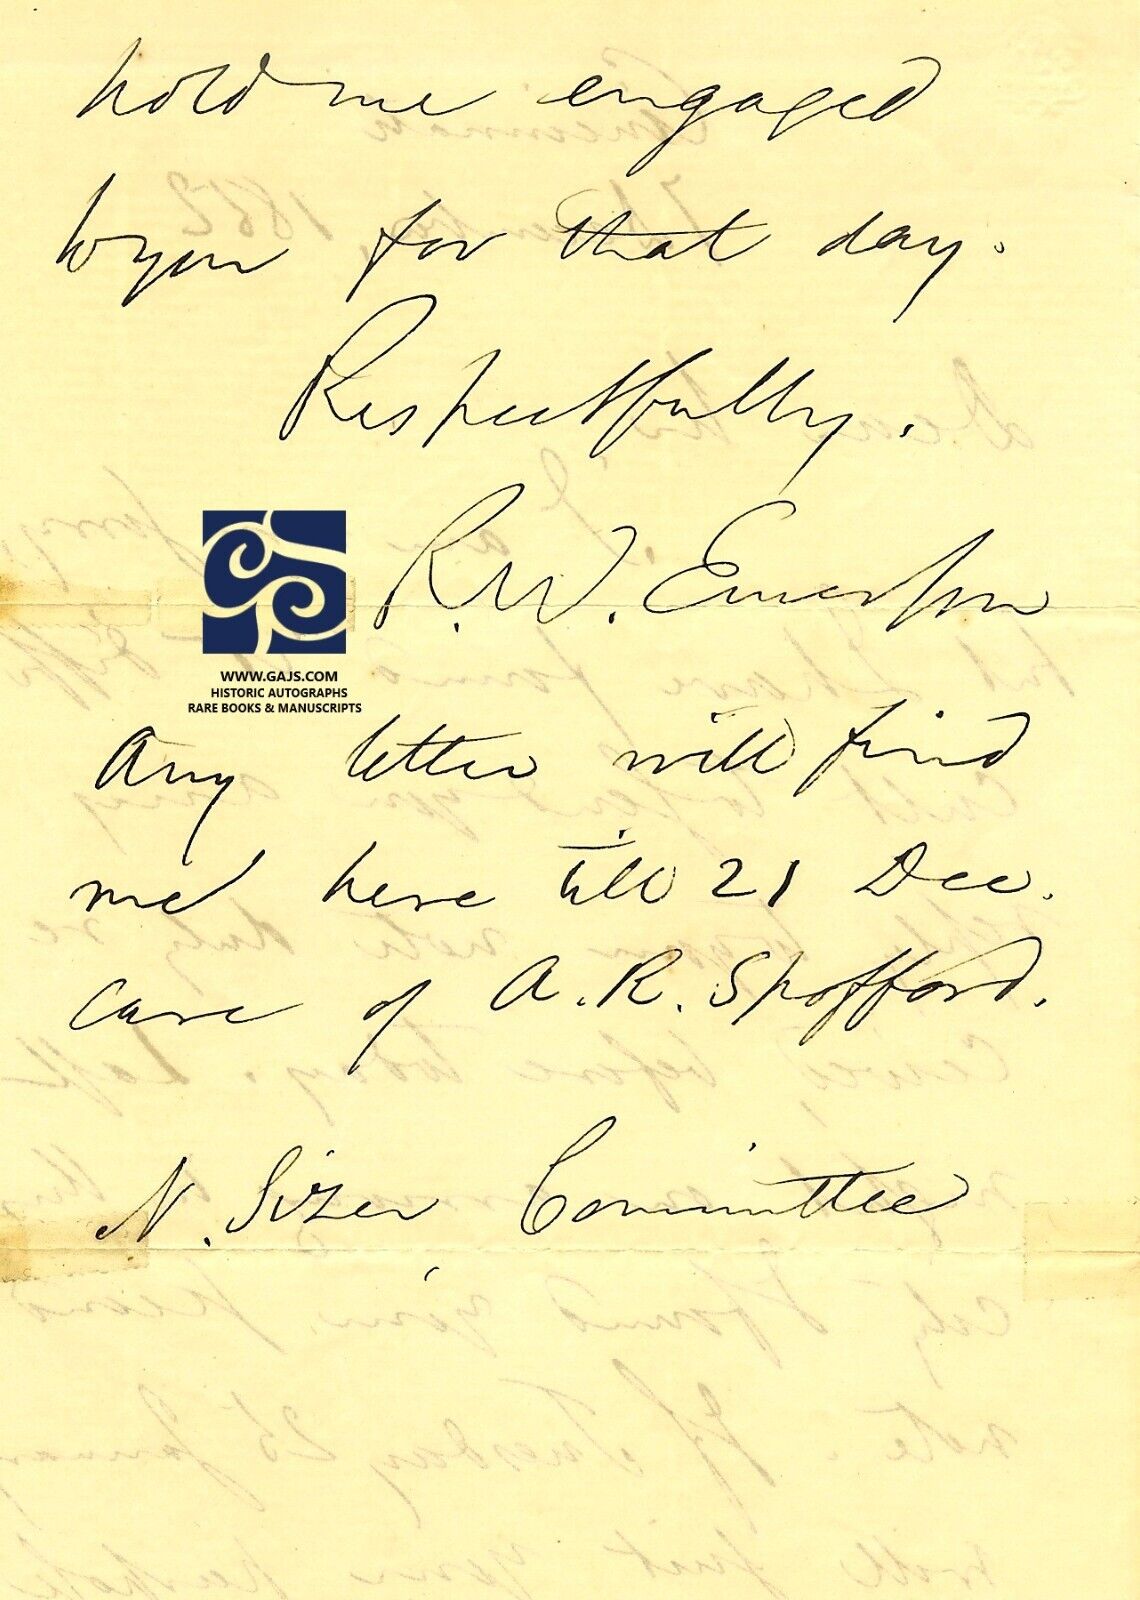 RALPH WALDO EMERSON - AUTOGRAPH LETTER SIGNED - 1852 -  LECTURING - PHRENOLOGY